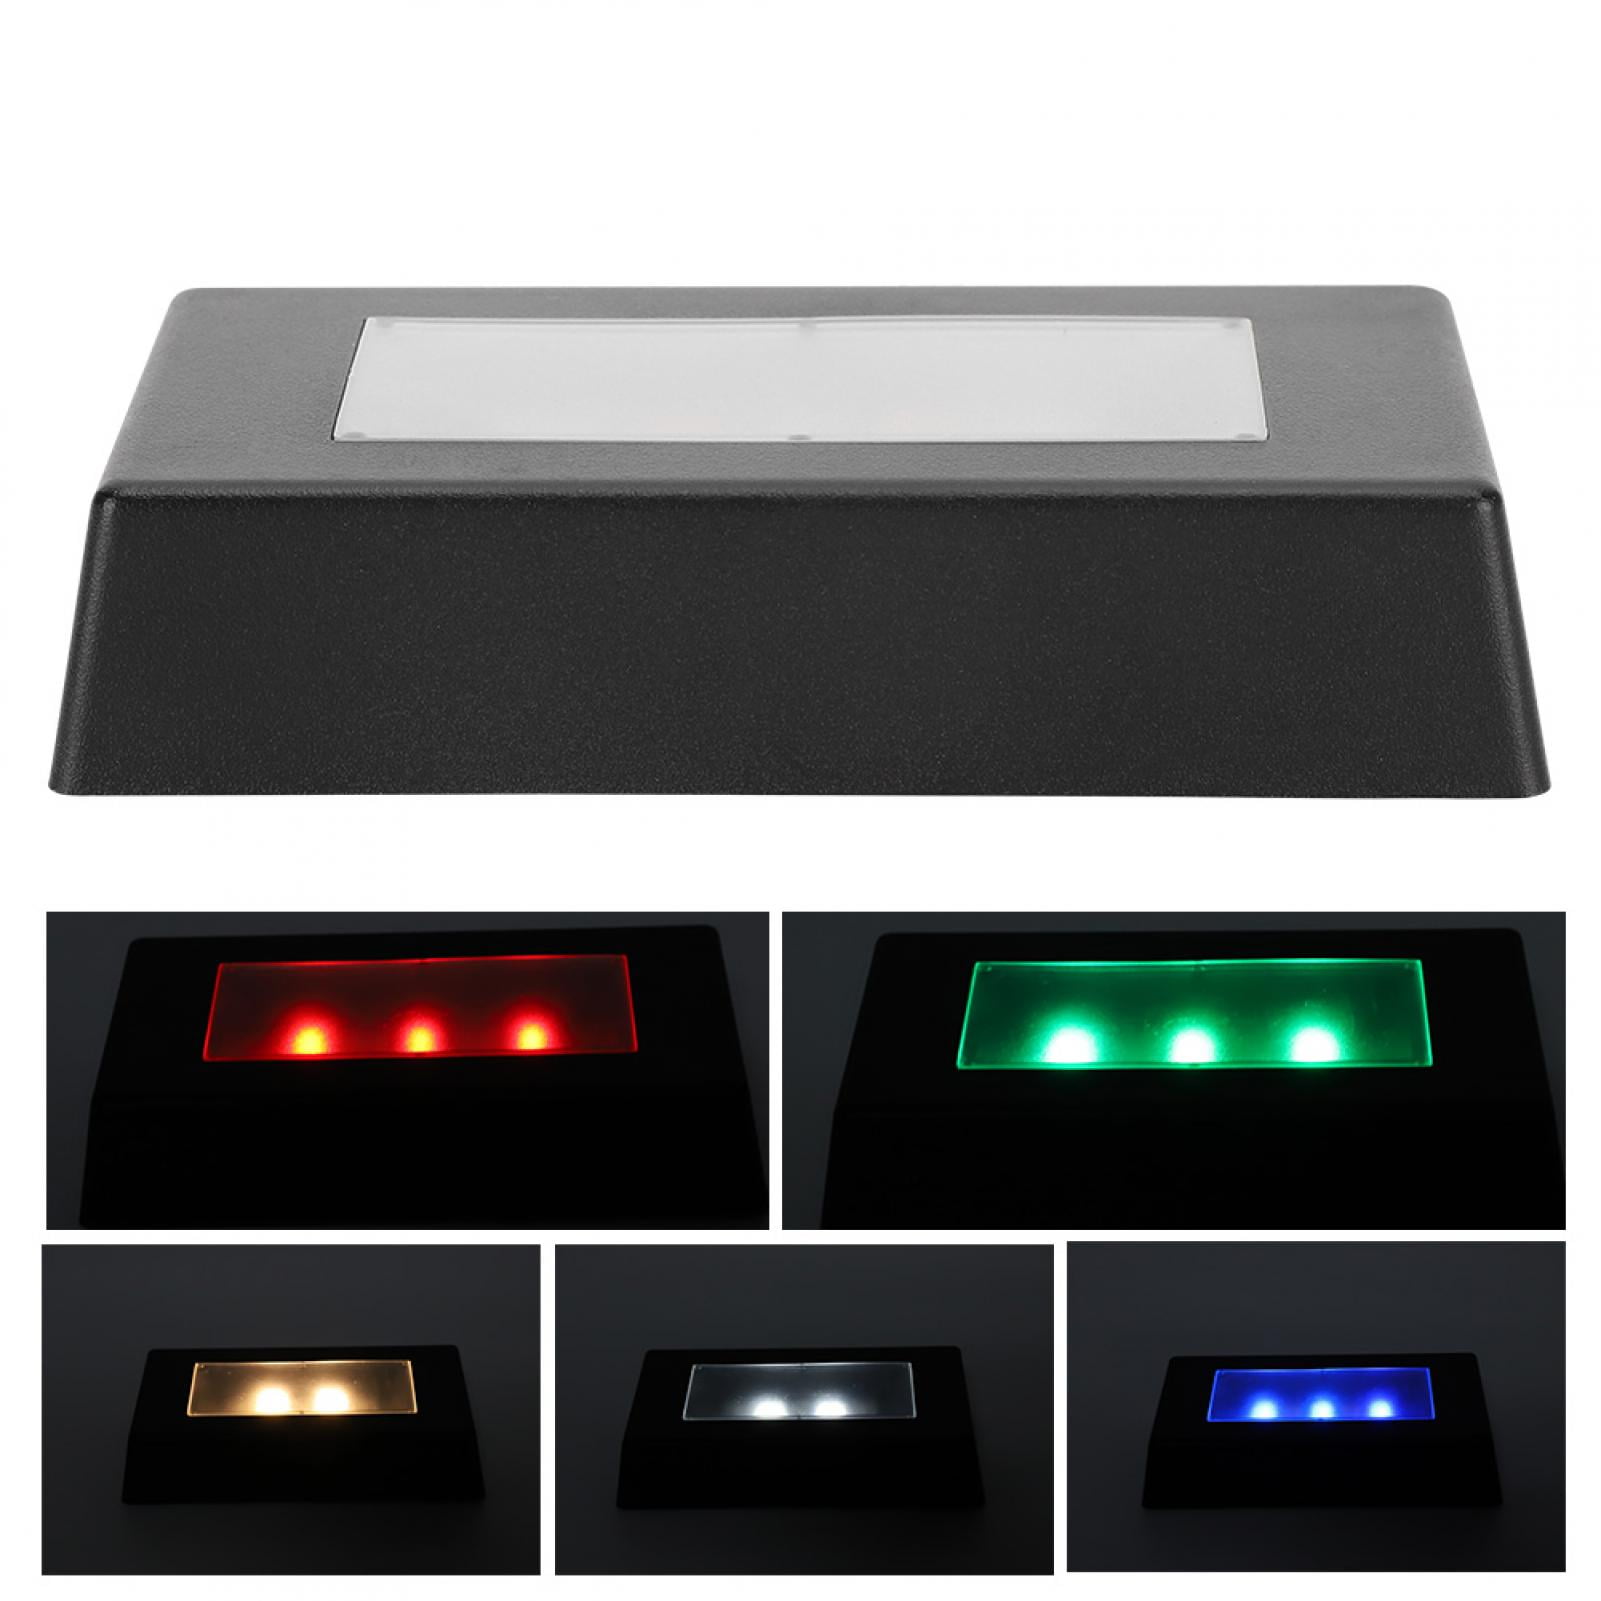 USB LED Multi-Colour Light Base Crysta l Statues Ornament Jewelry Display Stand